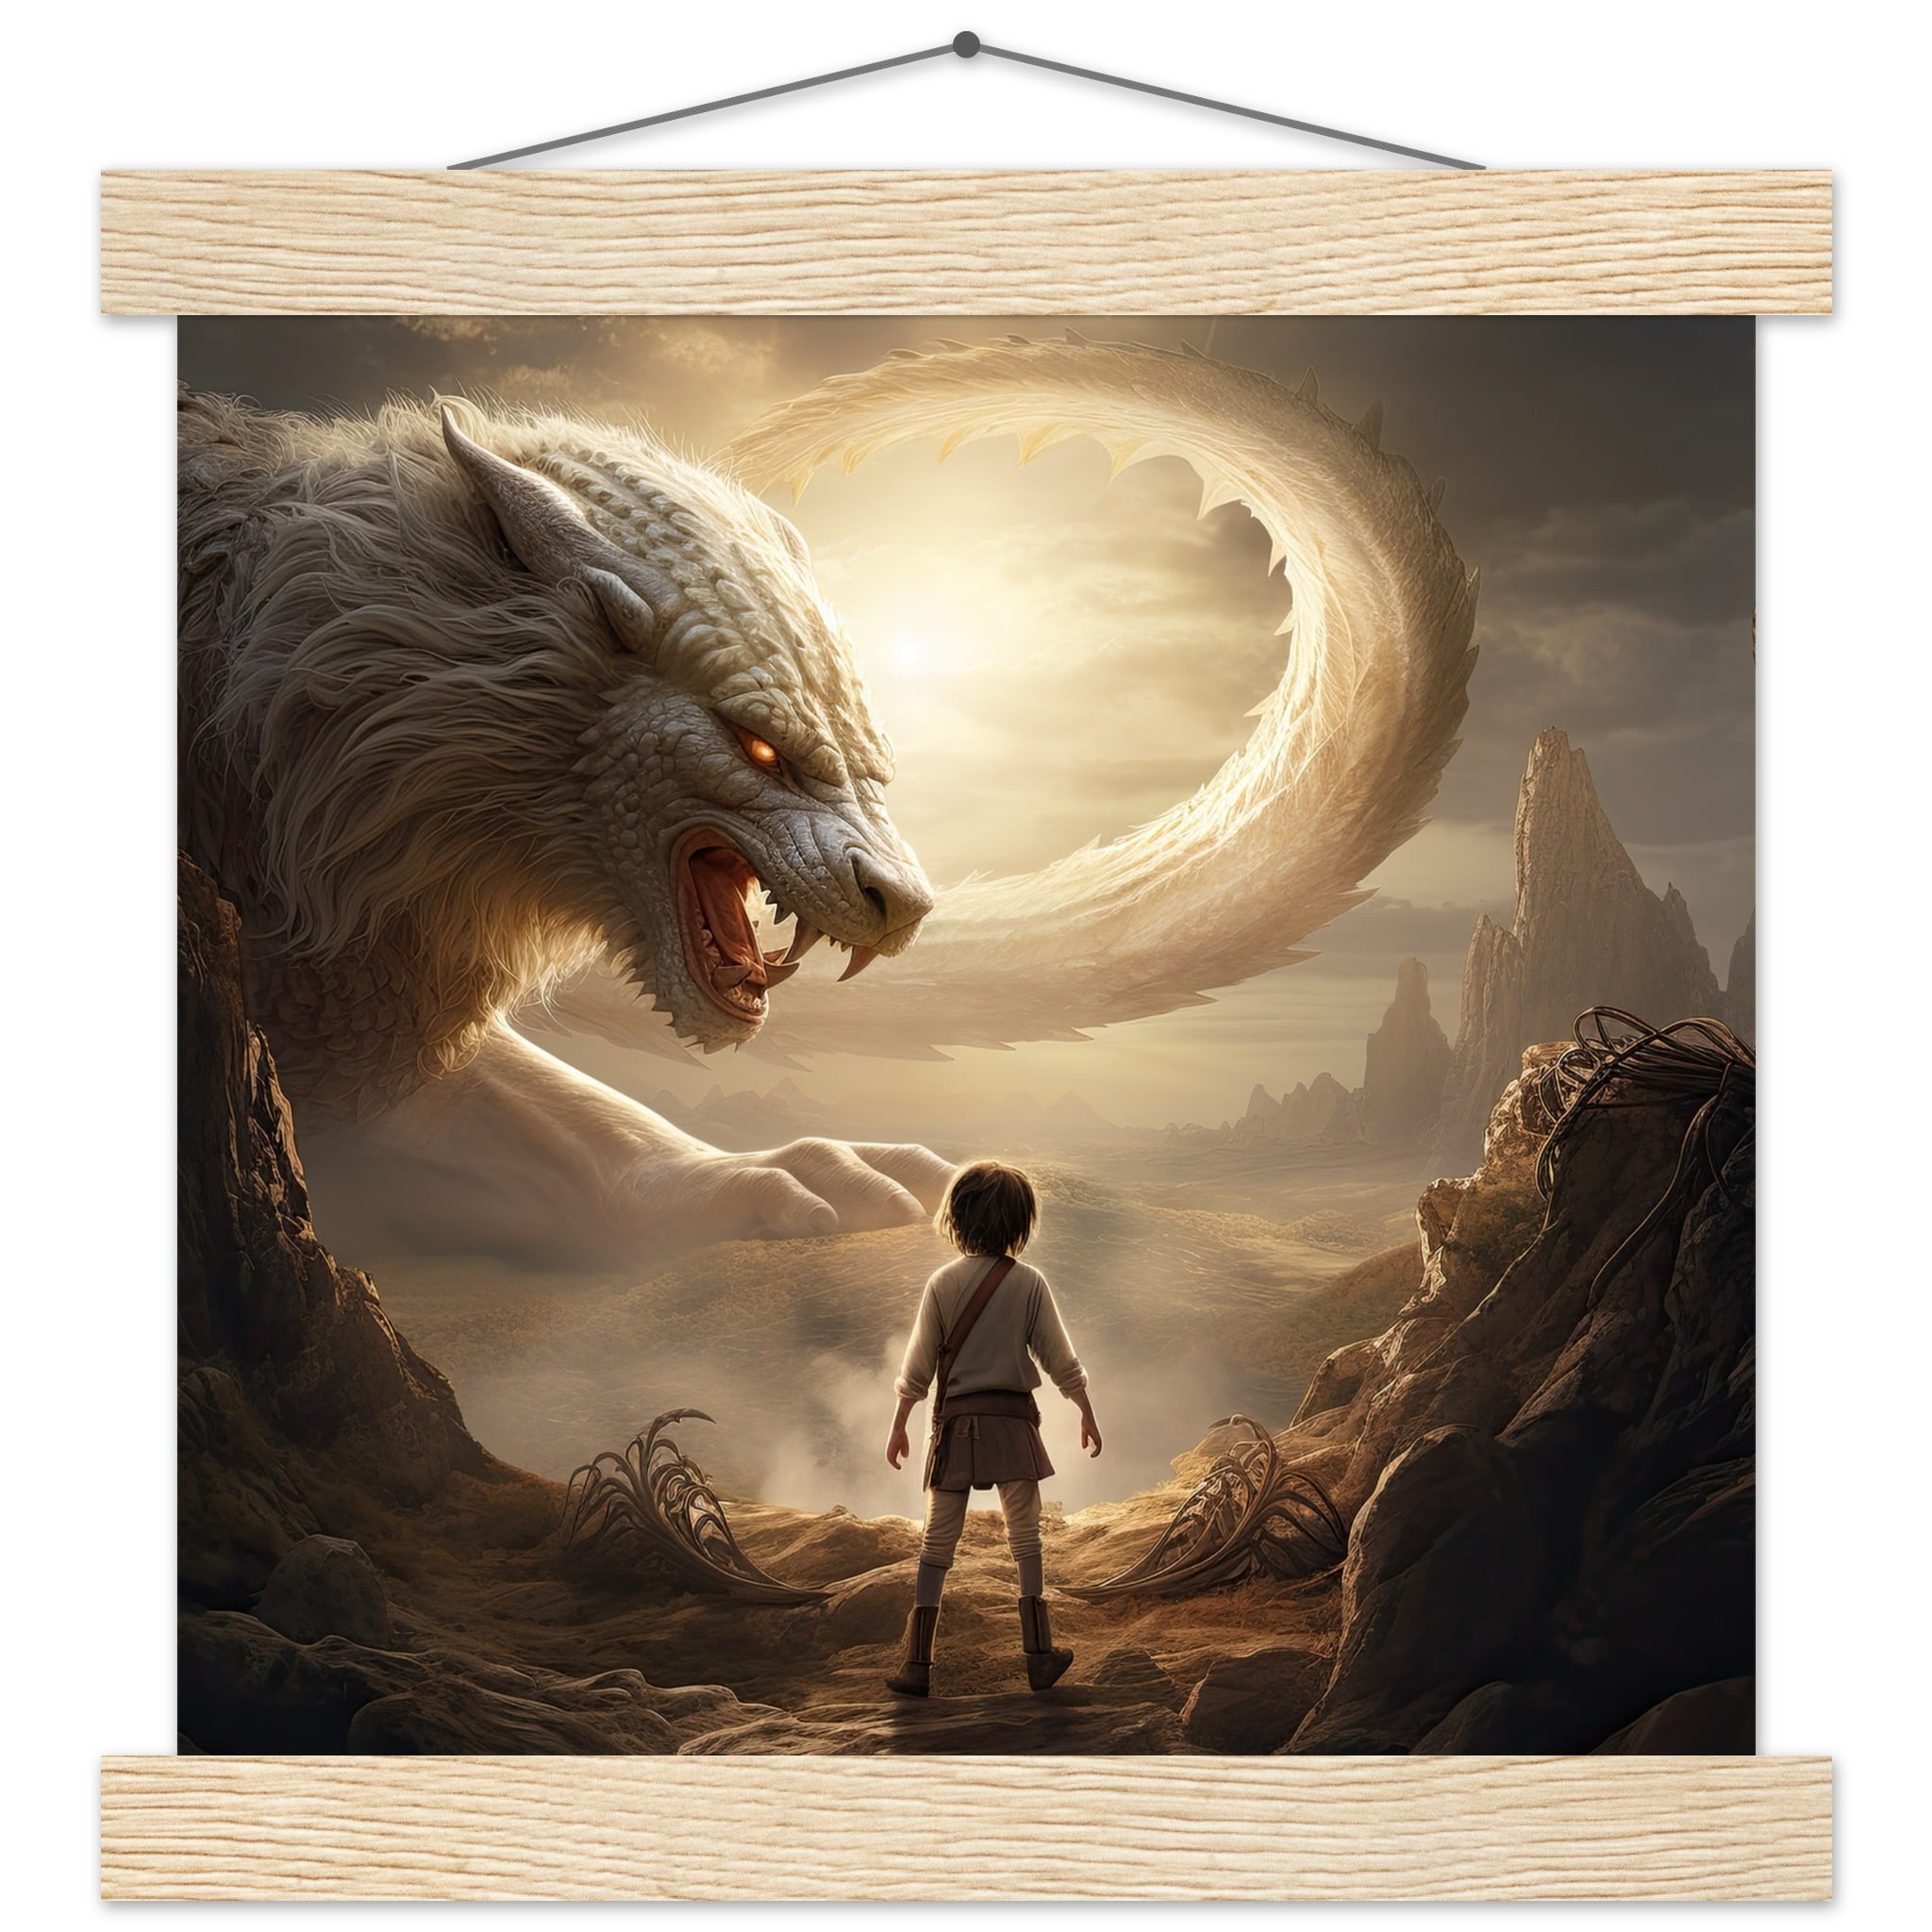 The Boy and the Chimera Art Print with Hanger – 25×25 cm / 10×10″, Natural wood wall hanger